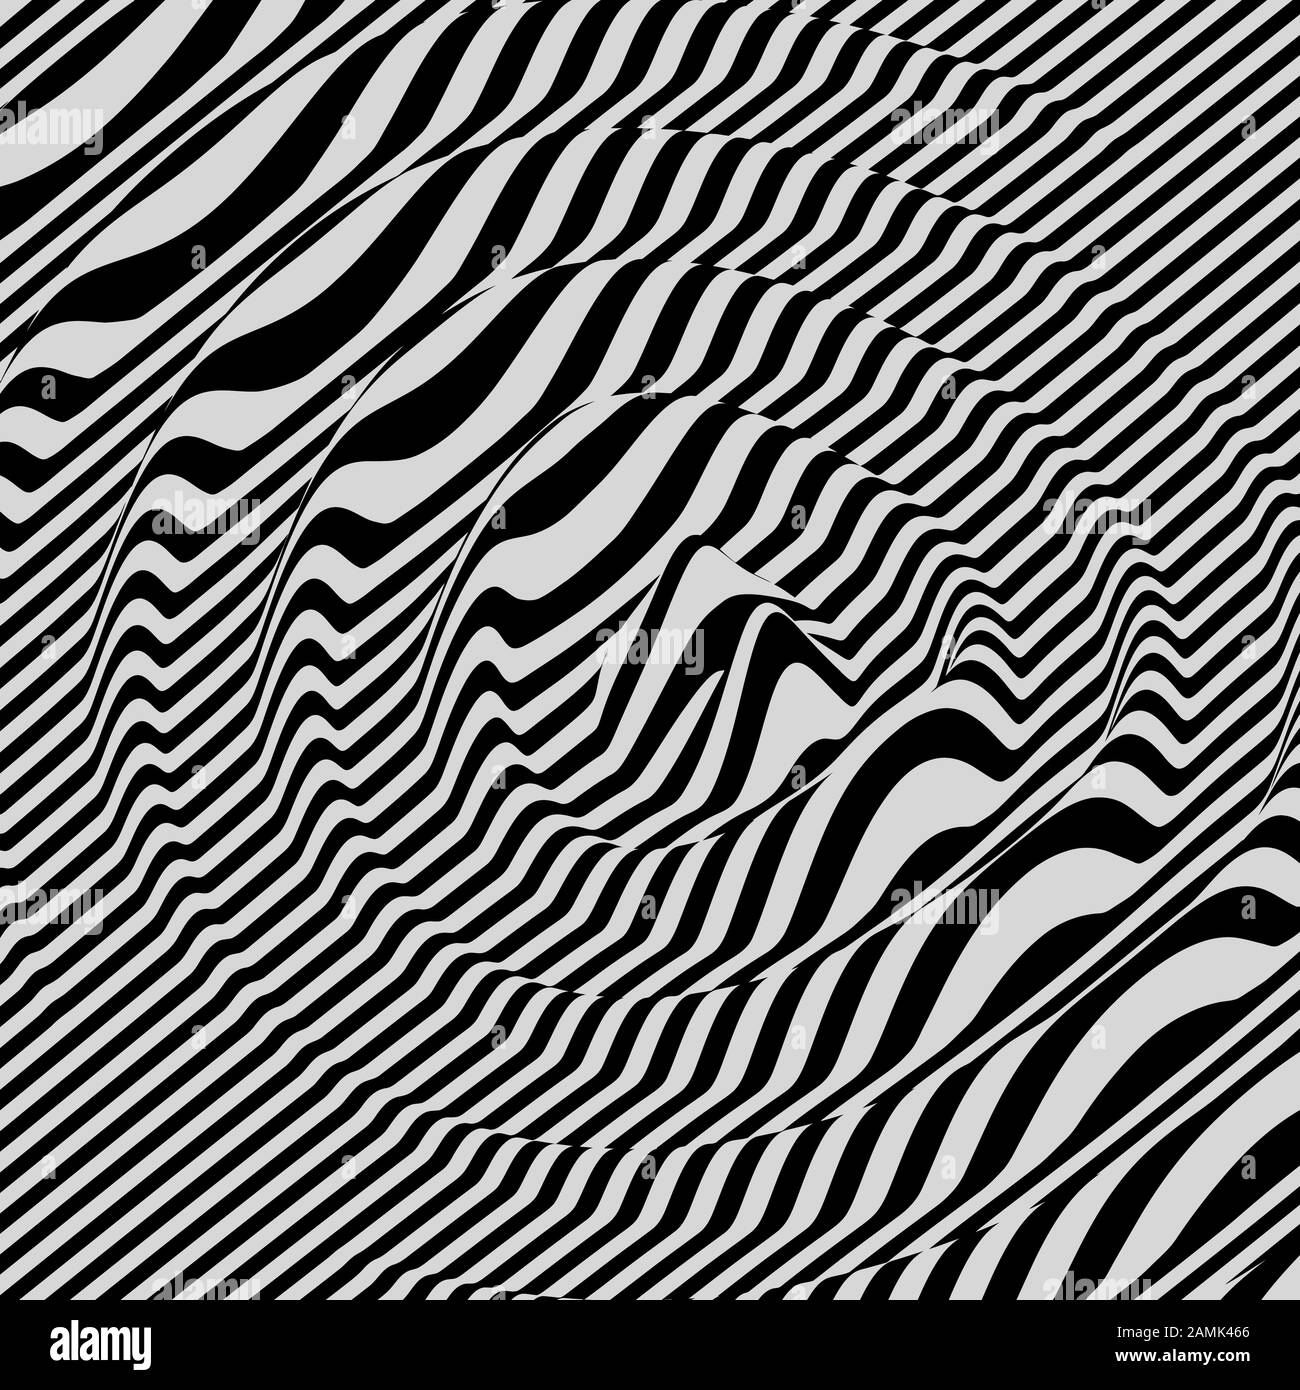 3D wavy background. Dynamic effect. Black and white design. Pattern ...